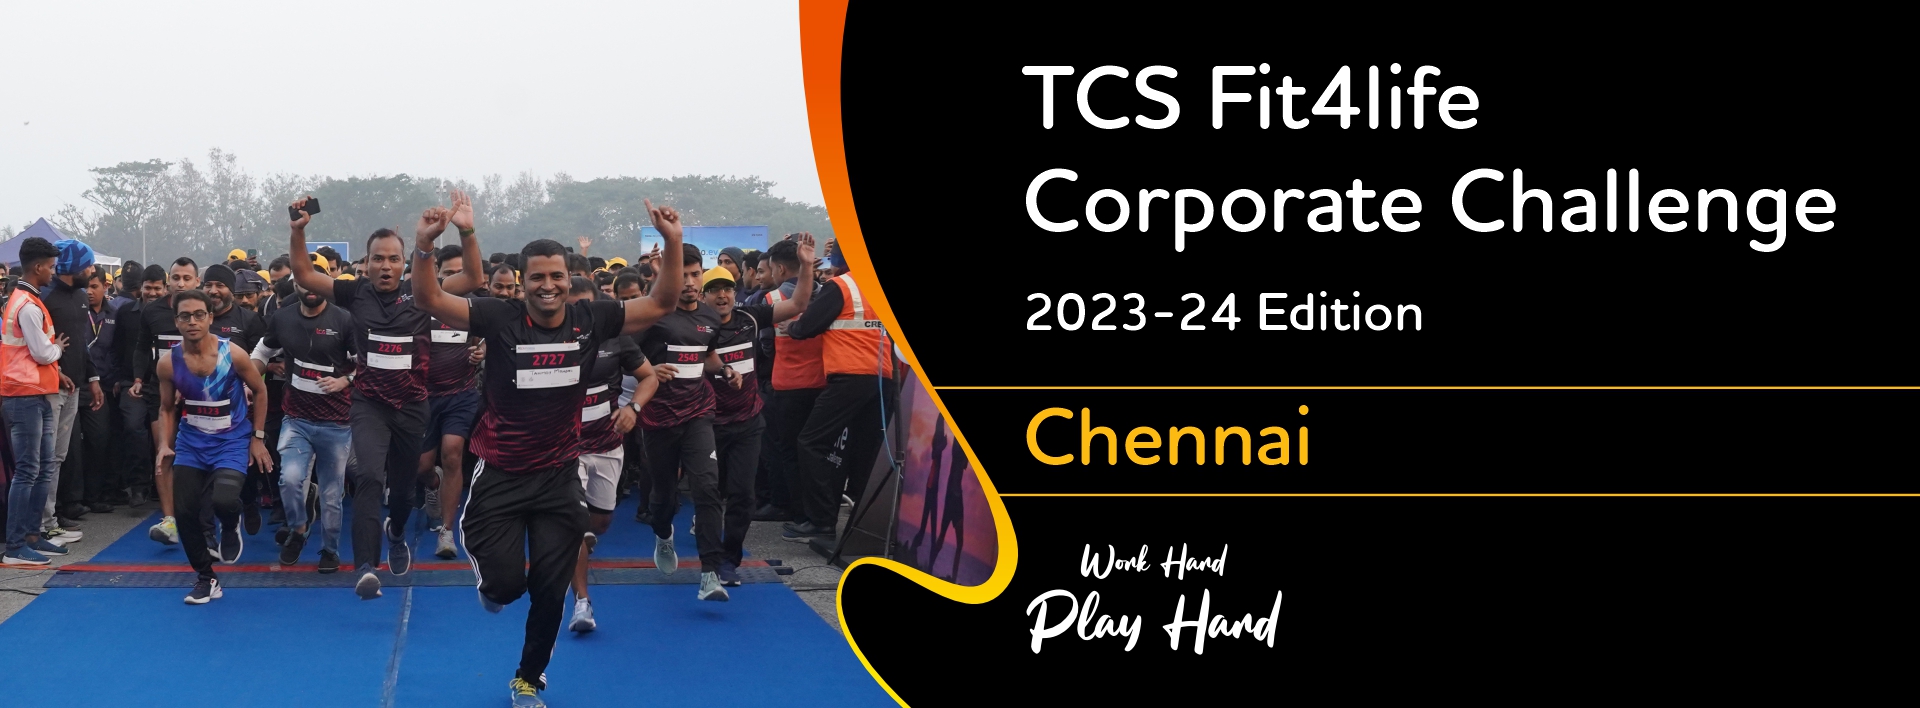 TCS Fit4Life Corporate Challenge Embrace the Run!